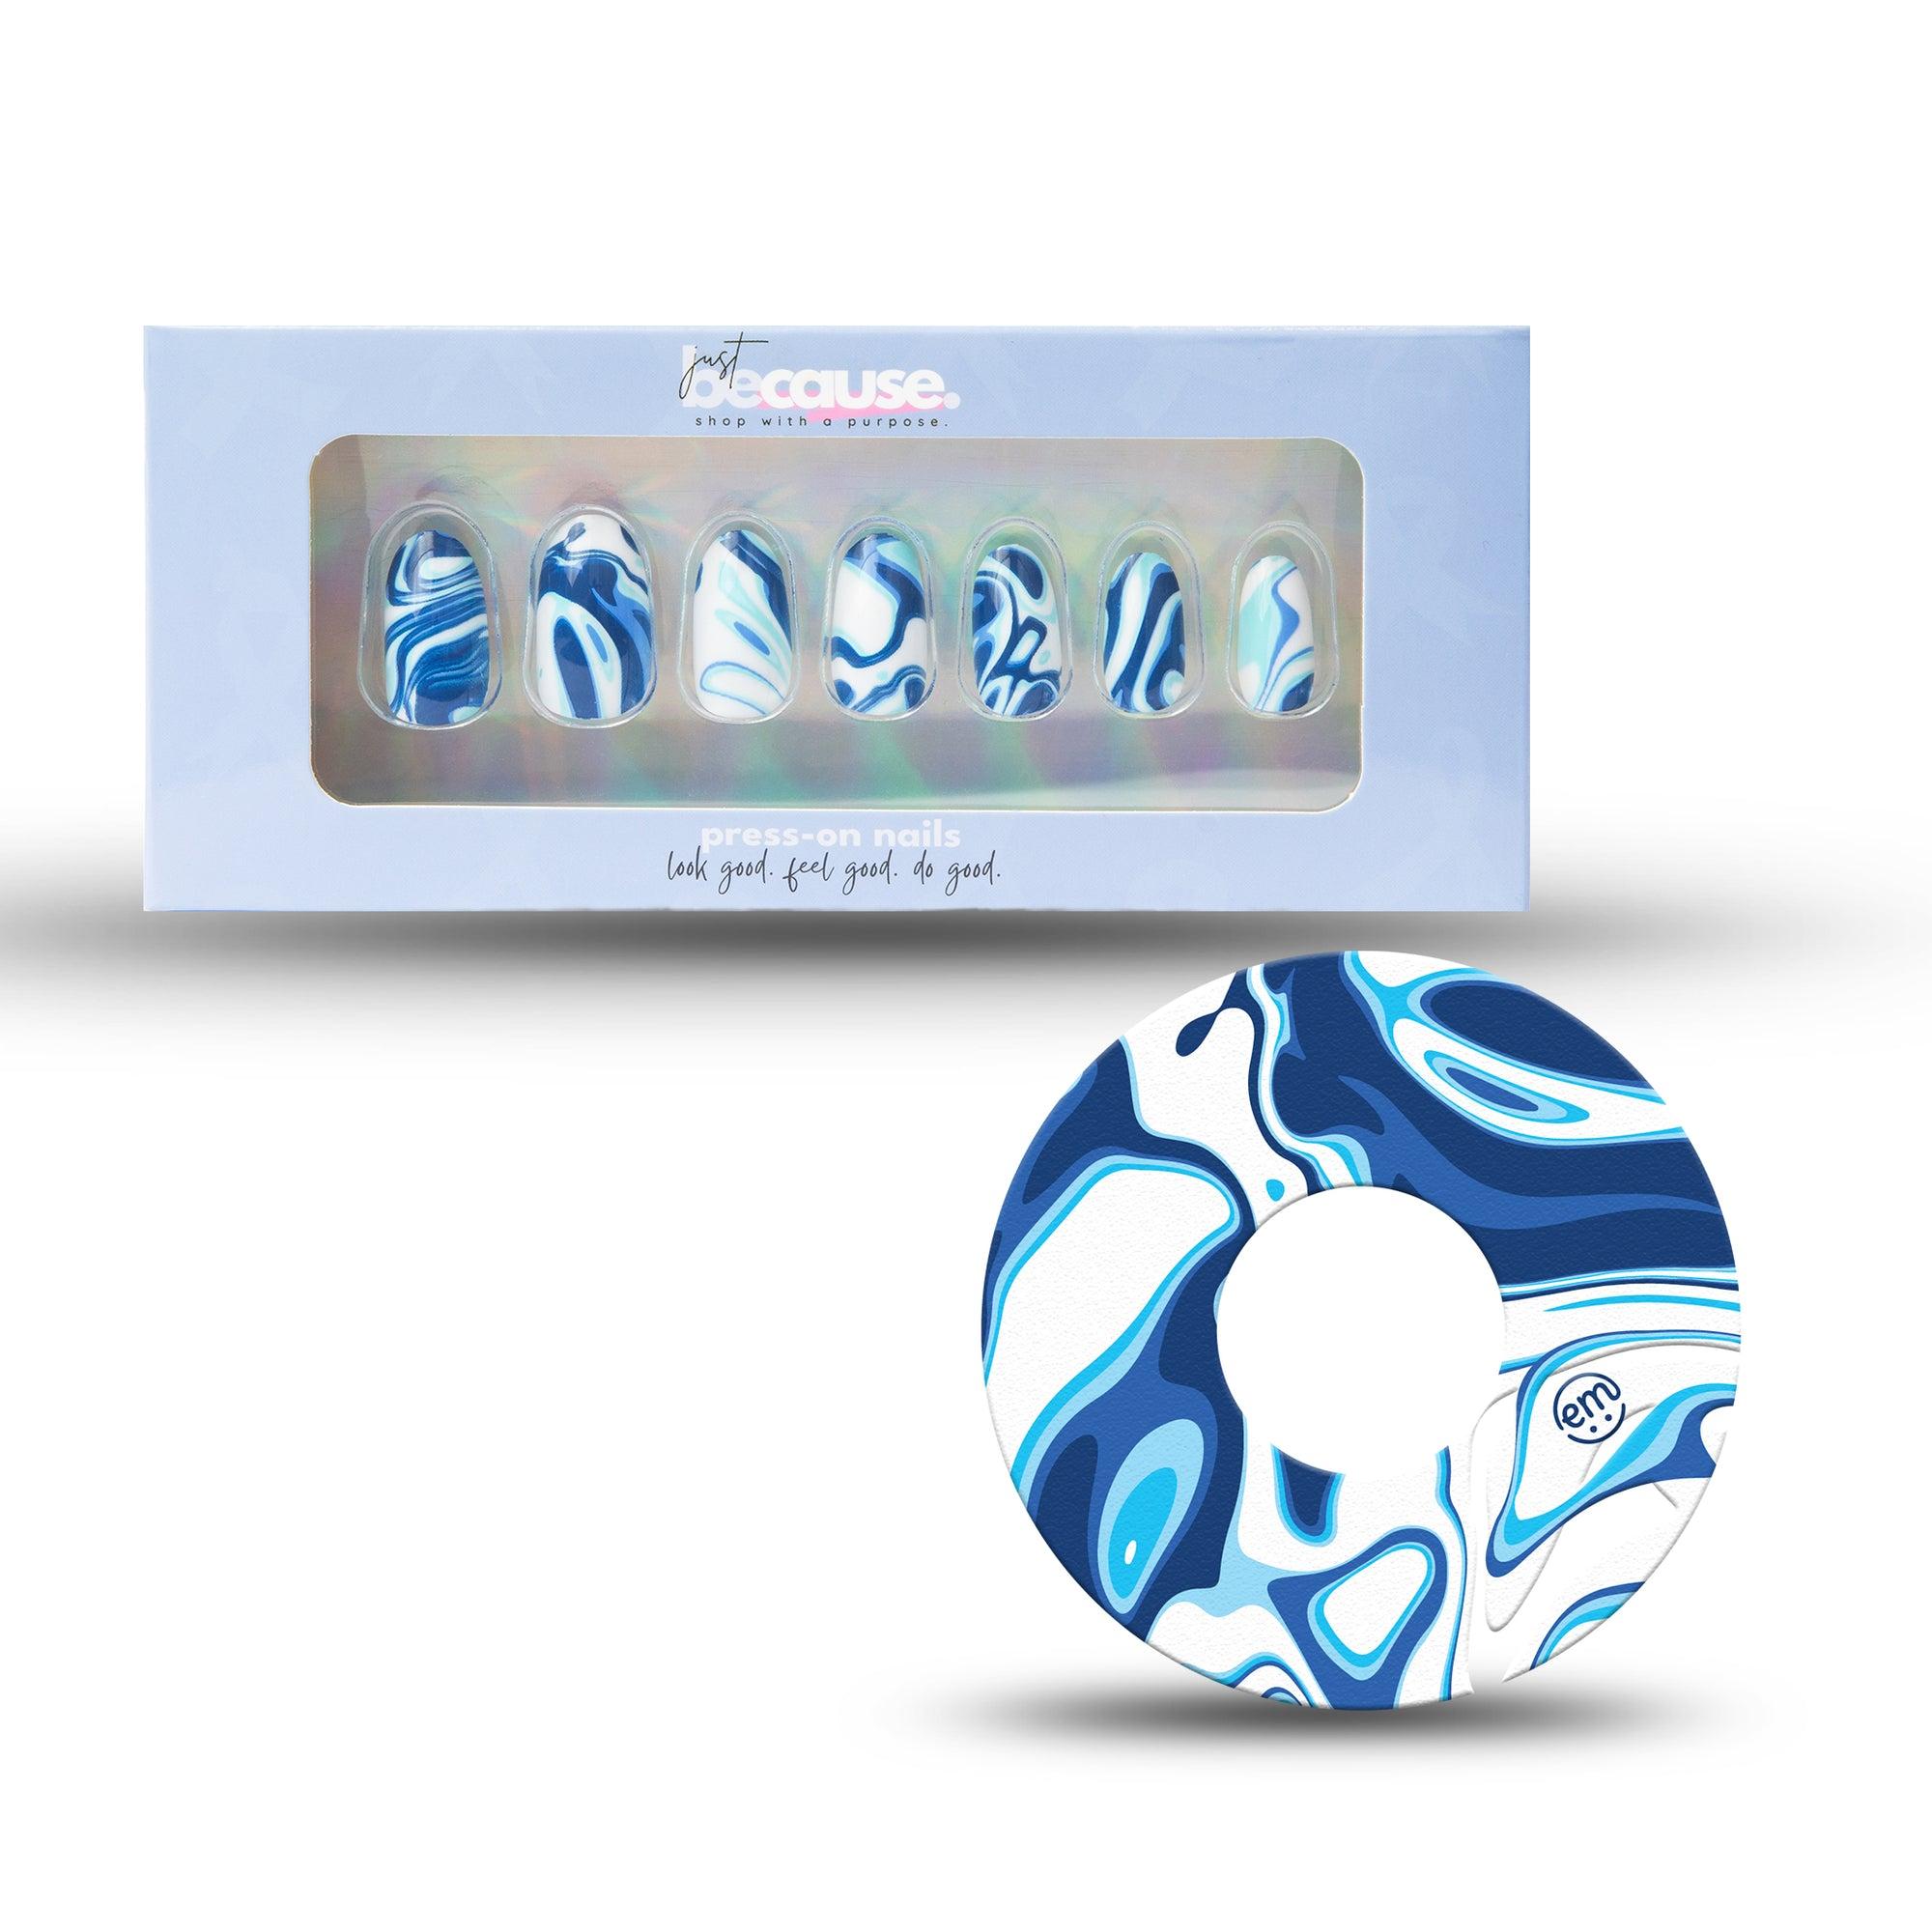 Just BeCause 24 Pcs ABS Press on nails Medium, Blue and white marble Fake Nails set with matching Blue and white marble Infusion Set Fixing Ring, Support T1D - ExpressionMed.com	